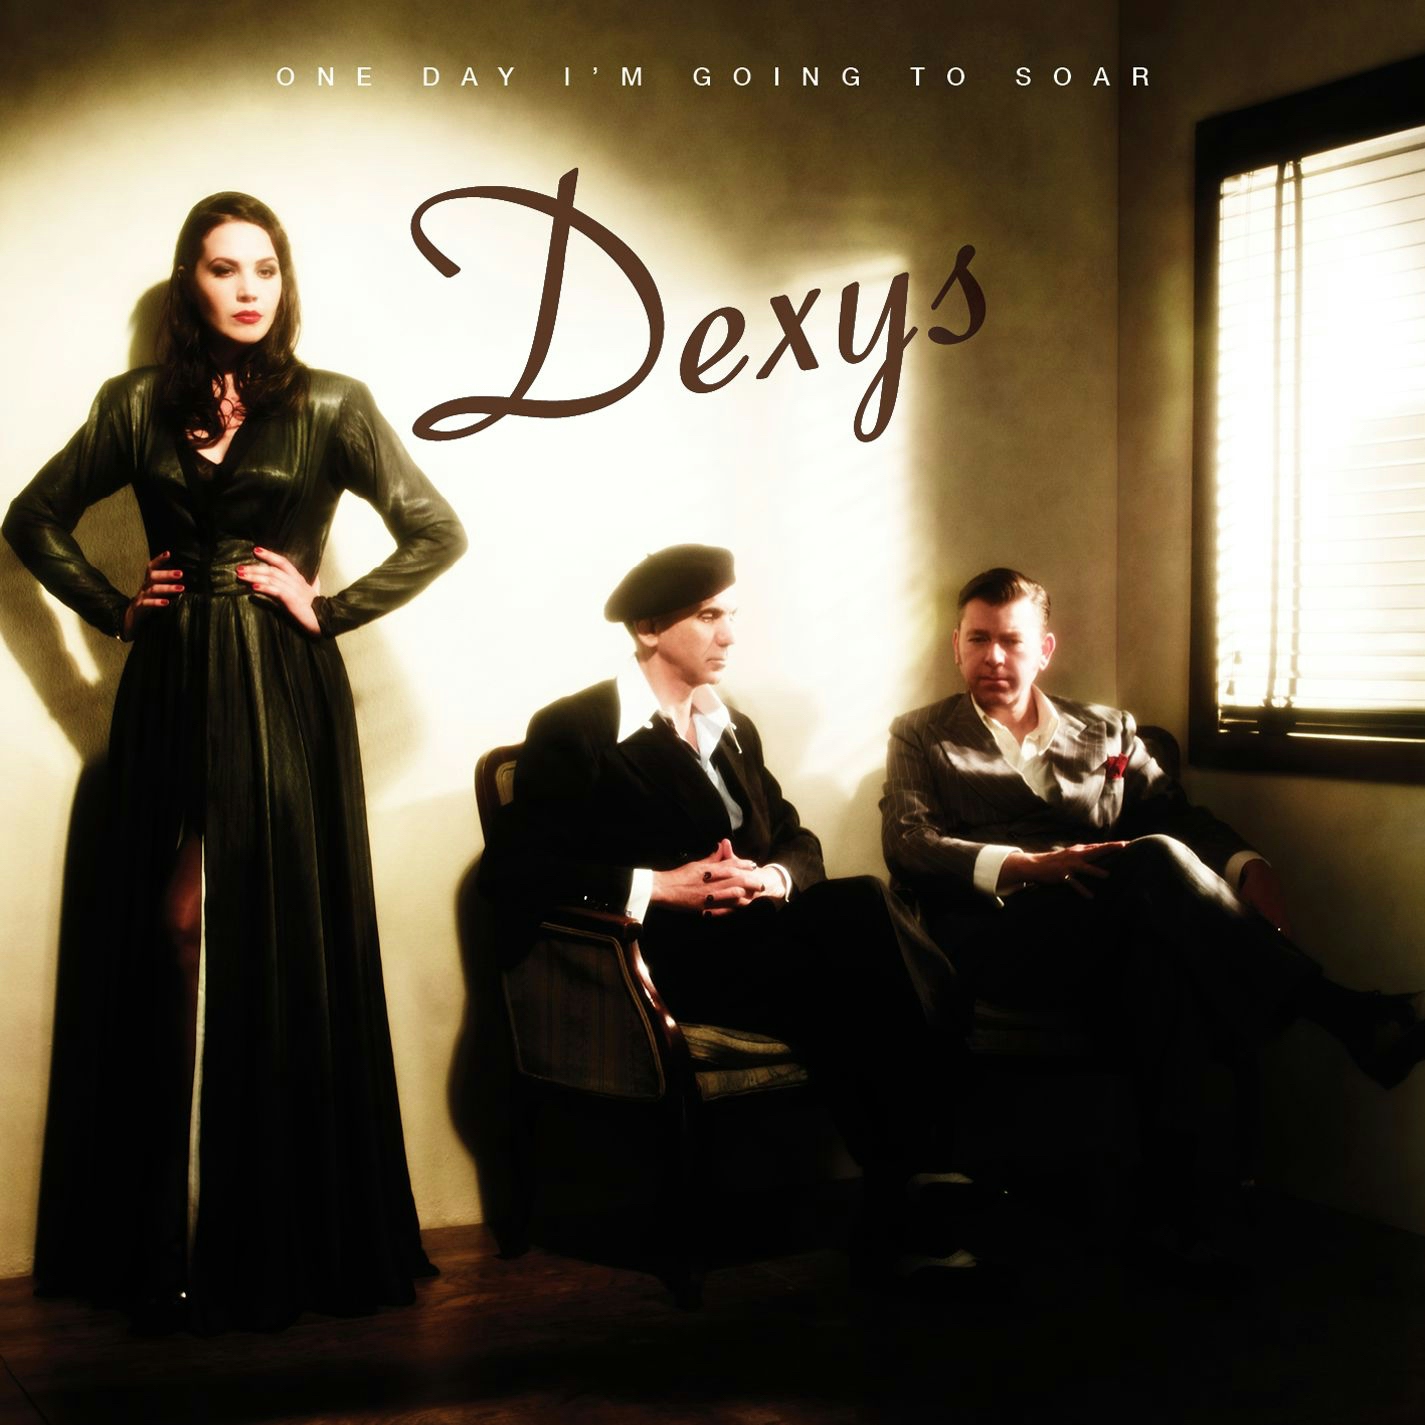 Album artwork for Album artwork for One Day I'm Going To Soar by Dexys by One Day I'm Going To Soar - Dexys